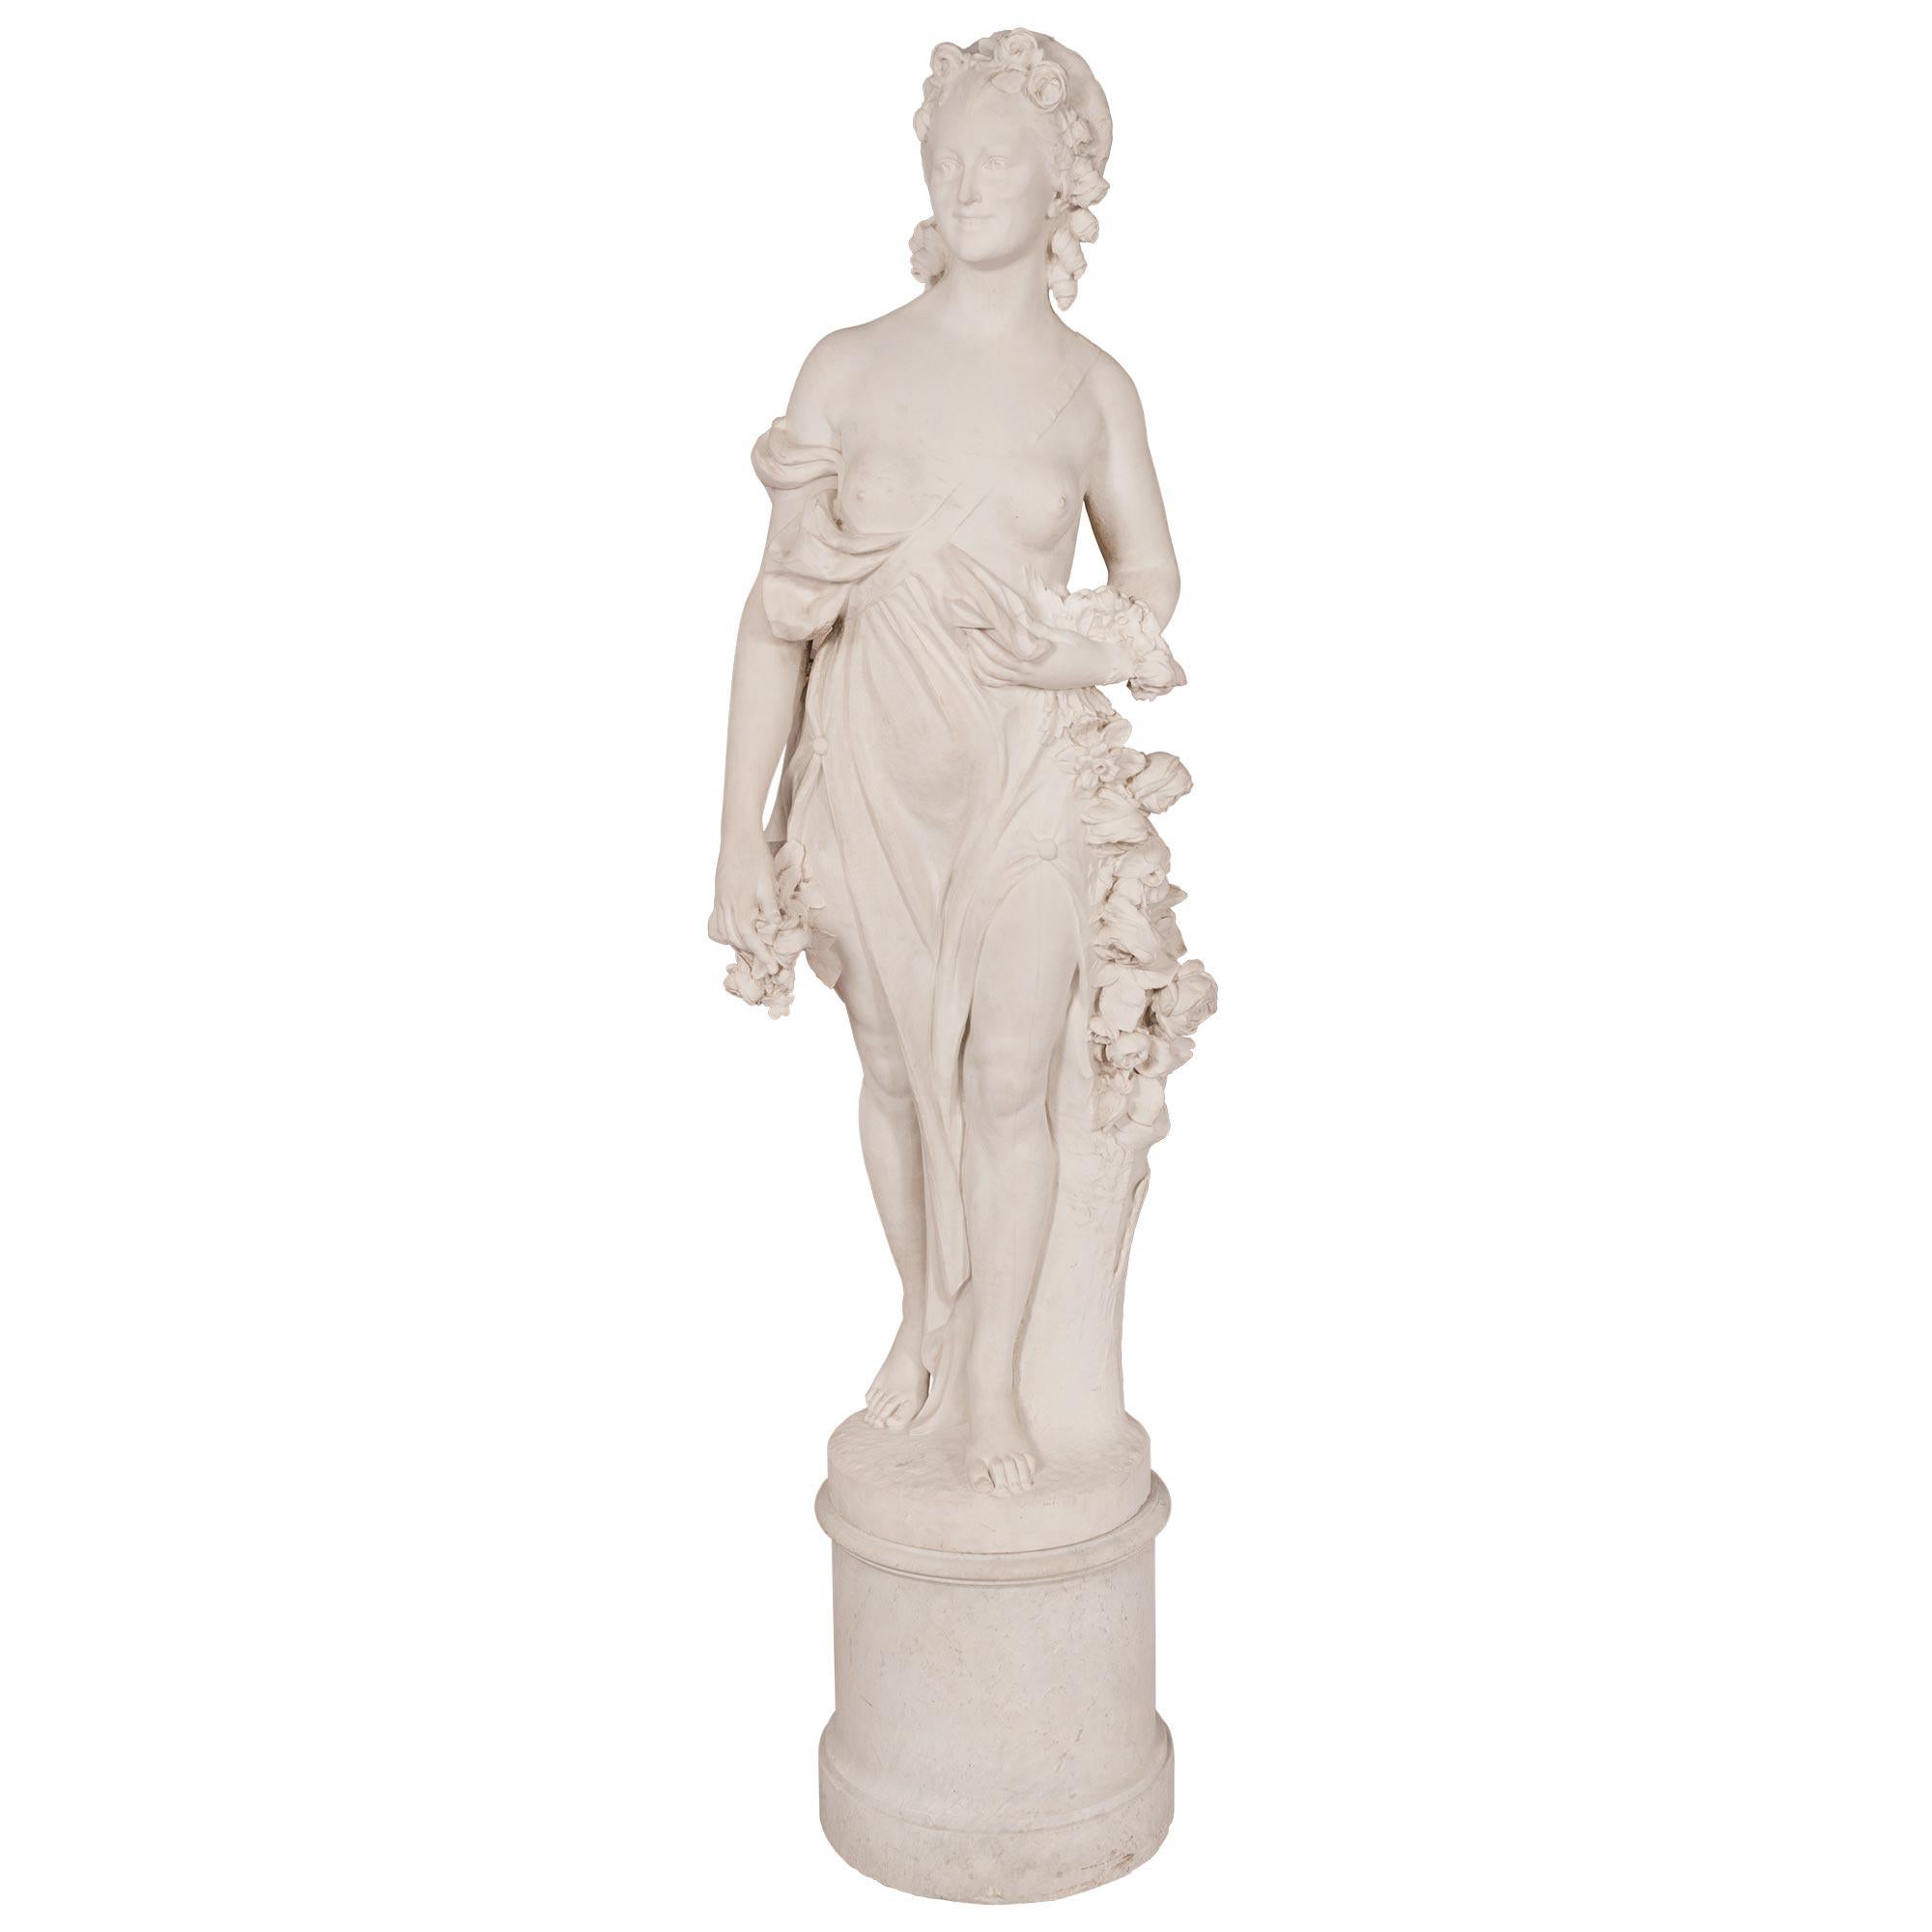 A sensational and monumentally scaled French mid 19th century white Carrara marble statue. The most impressive and statement making statue is raised by her original circular pedestal column which displays a fine mottled border. The high quality